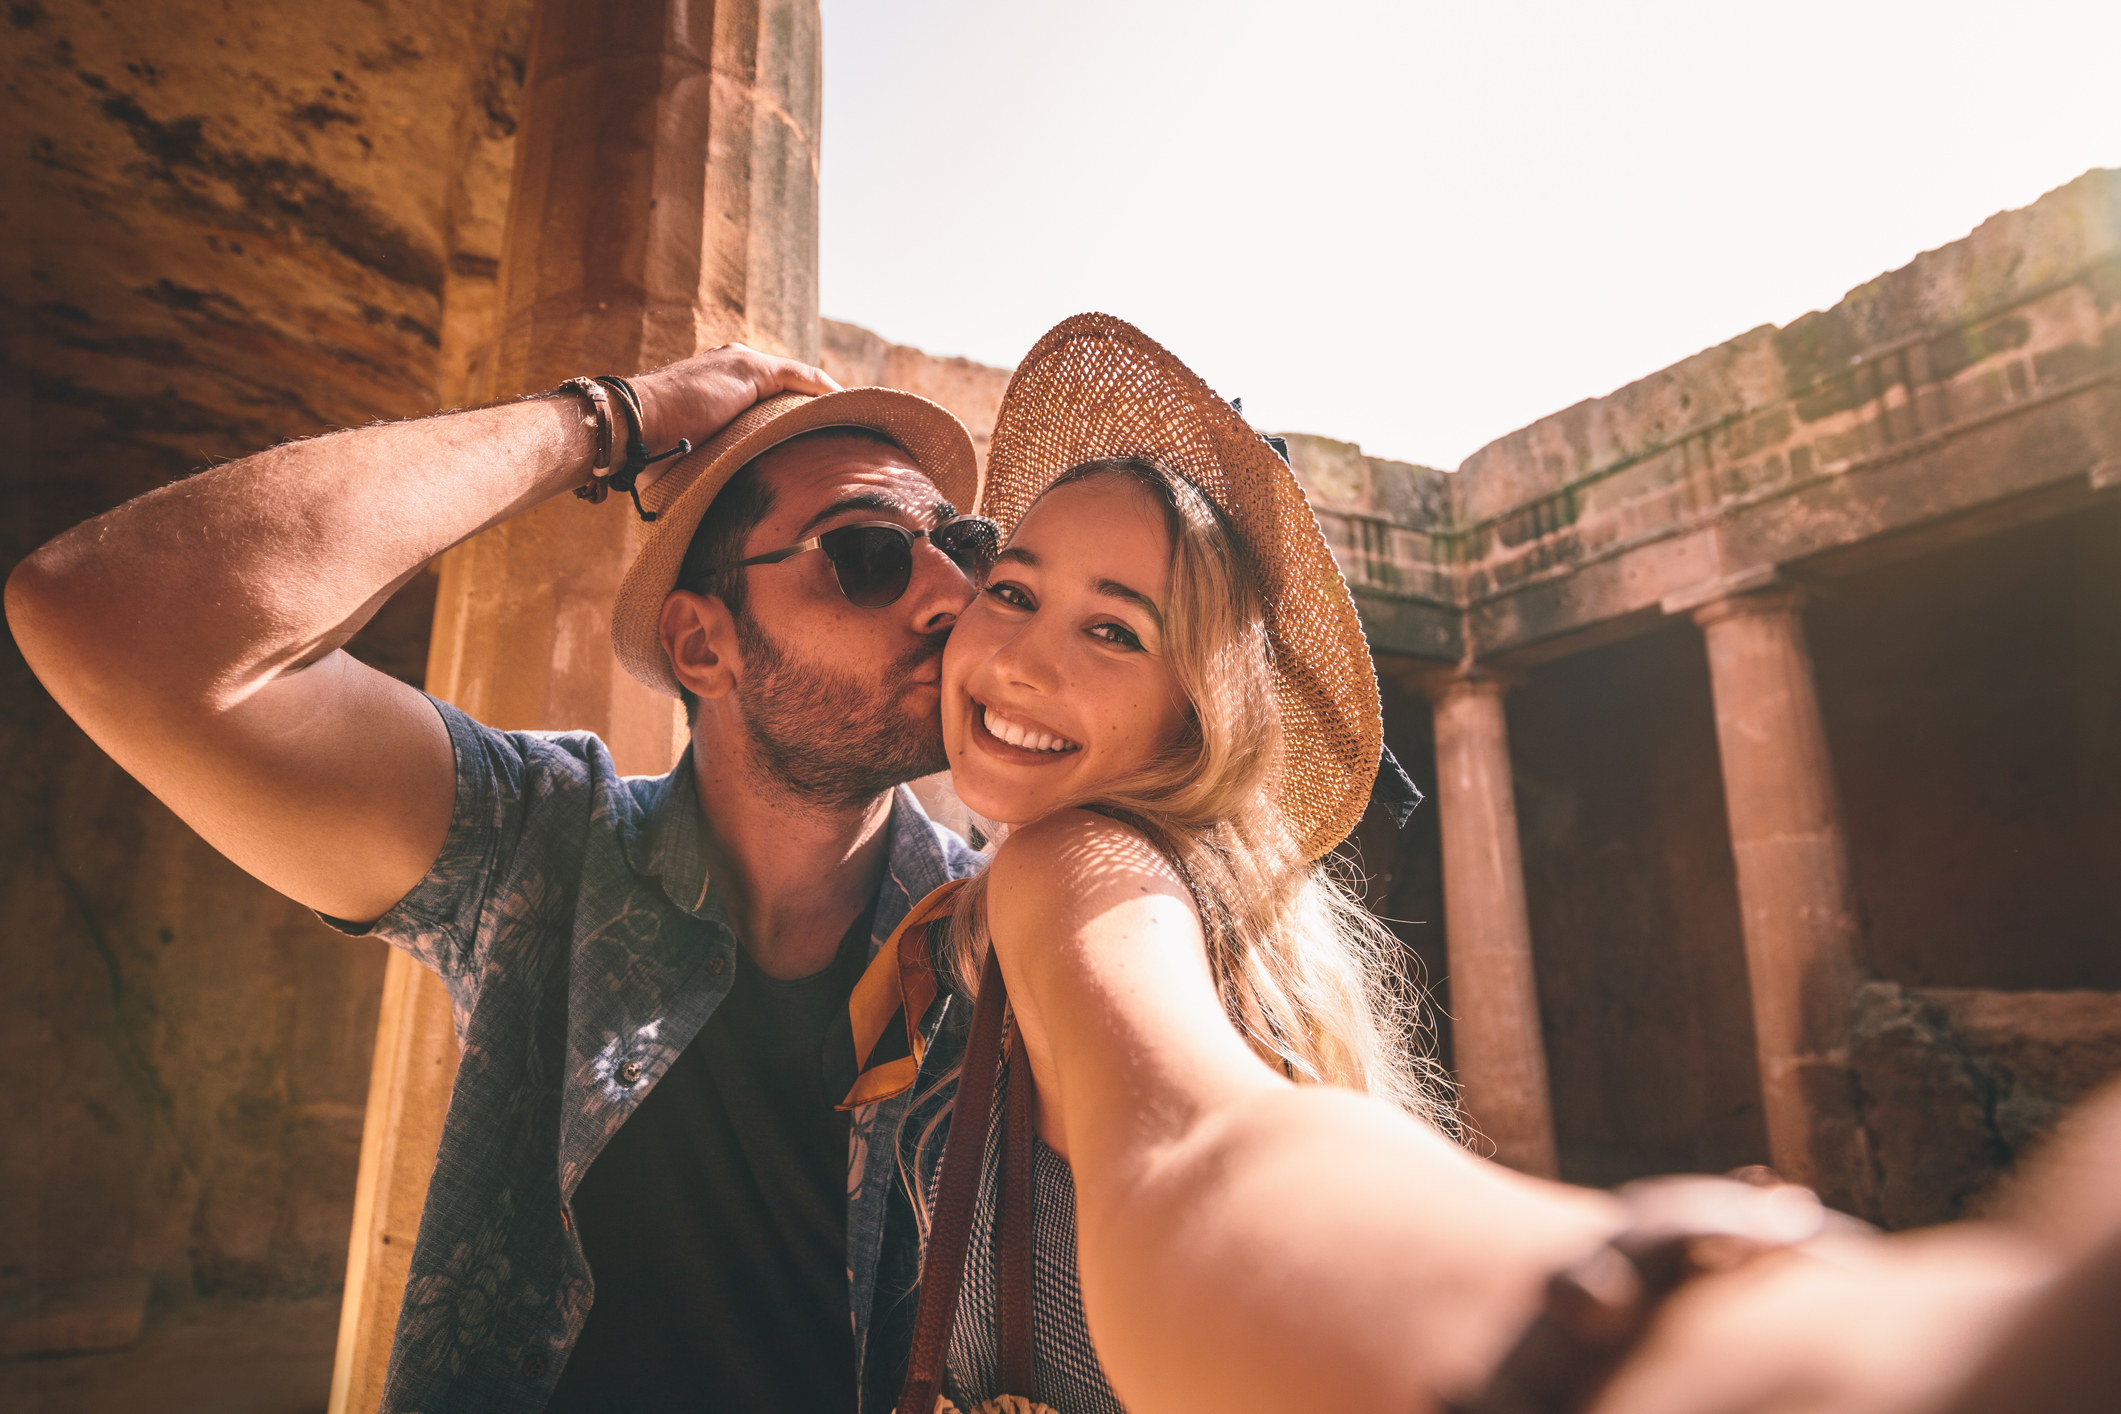 A couple on vacation taking a selfie